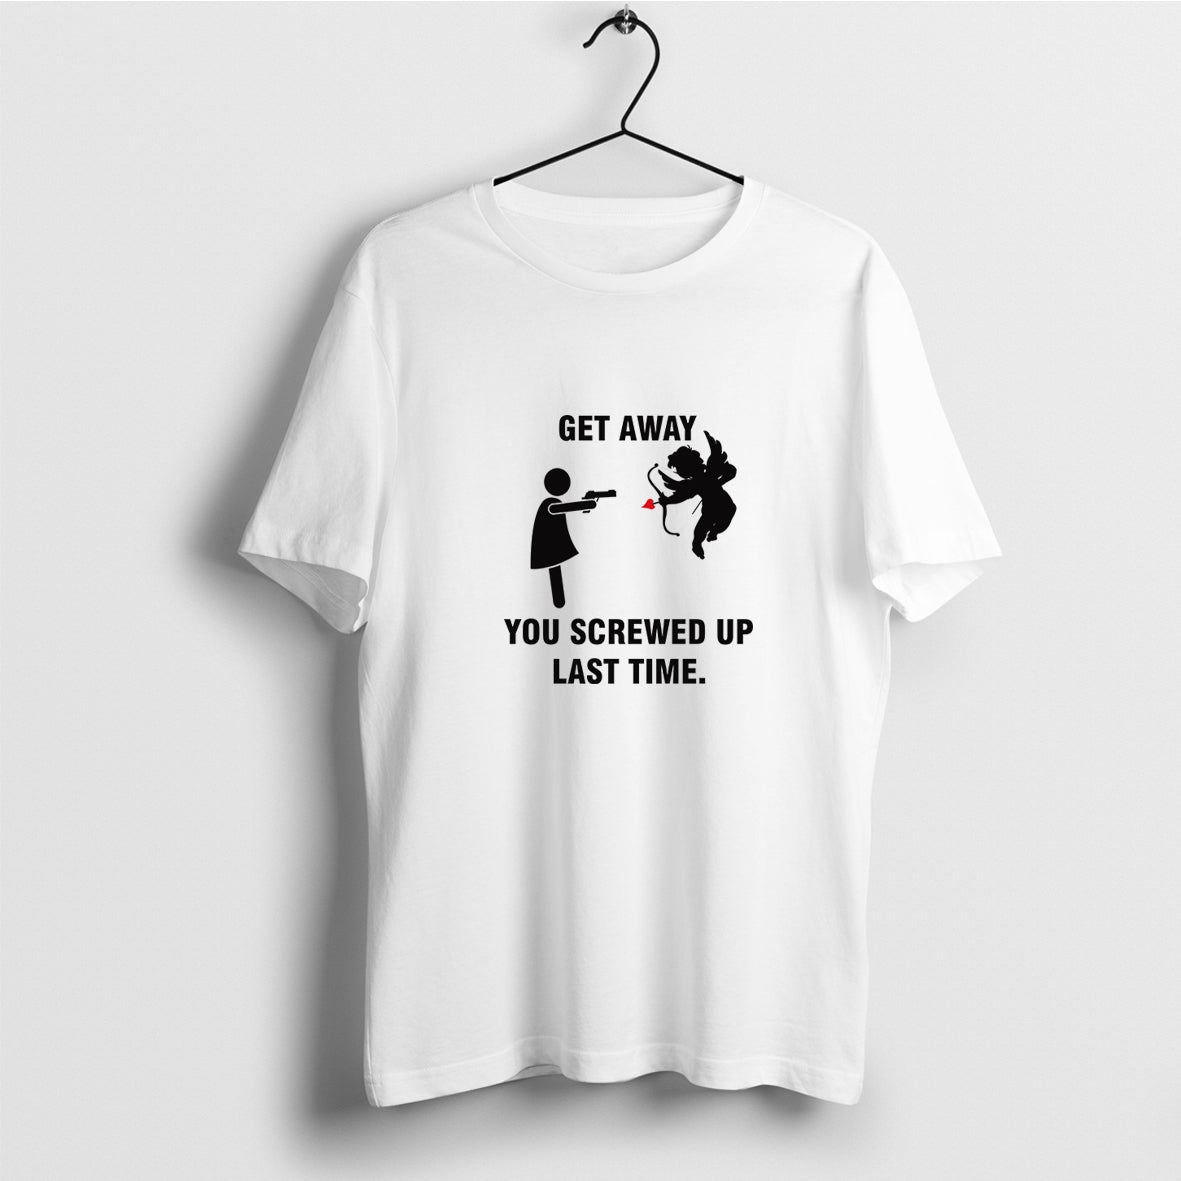 Get Away You Screwed up Last Time T-Shirt, Stay Away Shirt, Anti Valentines Day, Funny Valentine's Day Gift